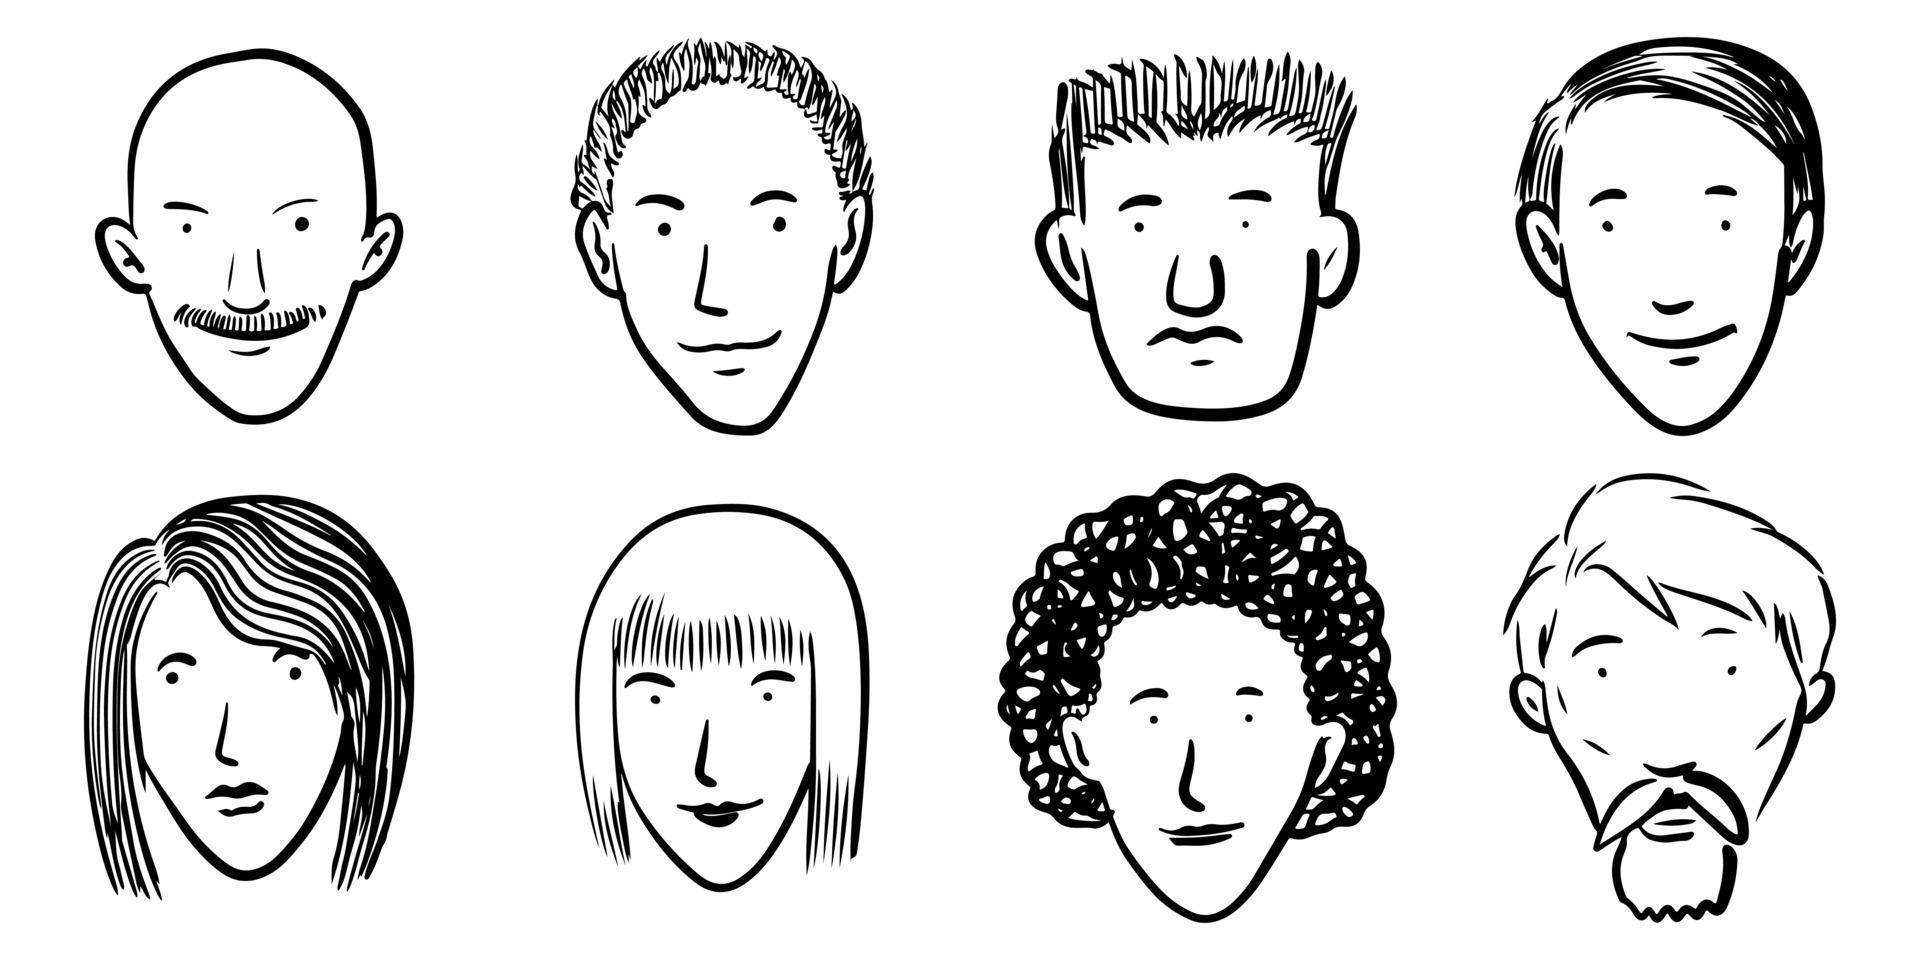 set of cute and diverse hand drawn faces isolated on white background. vector illustration.